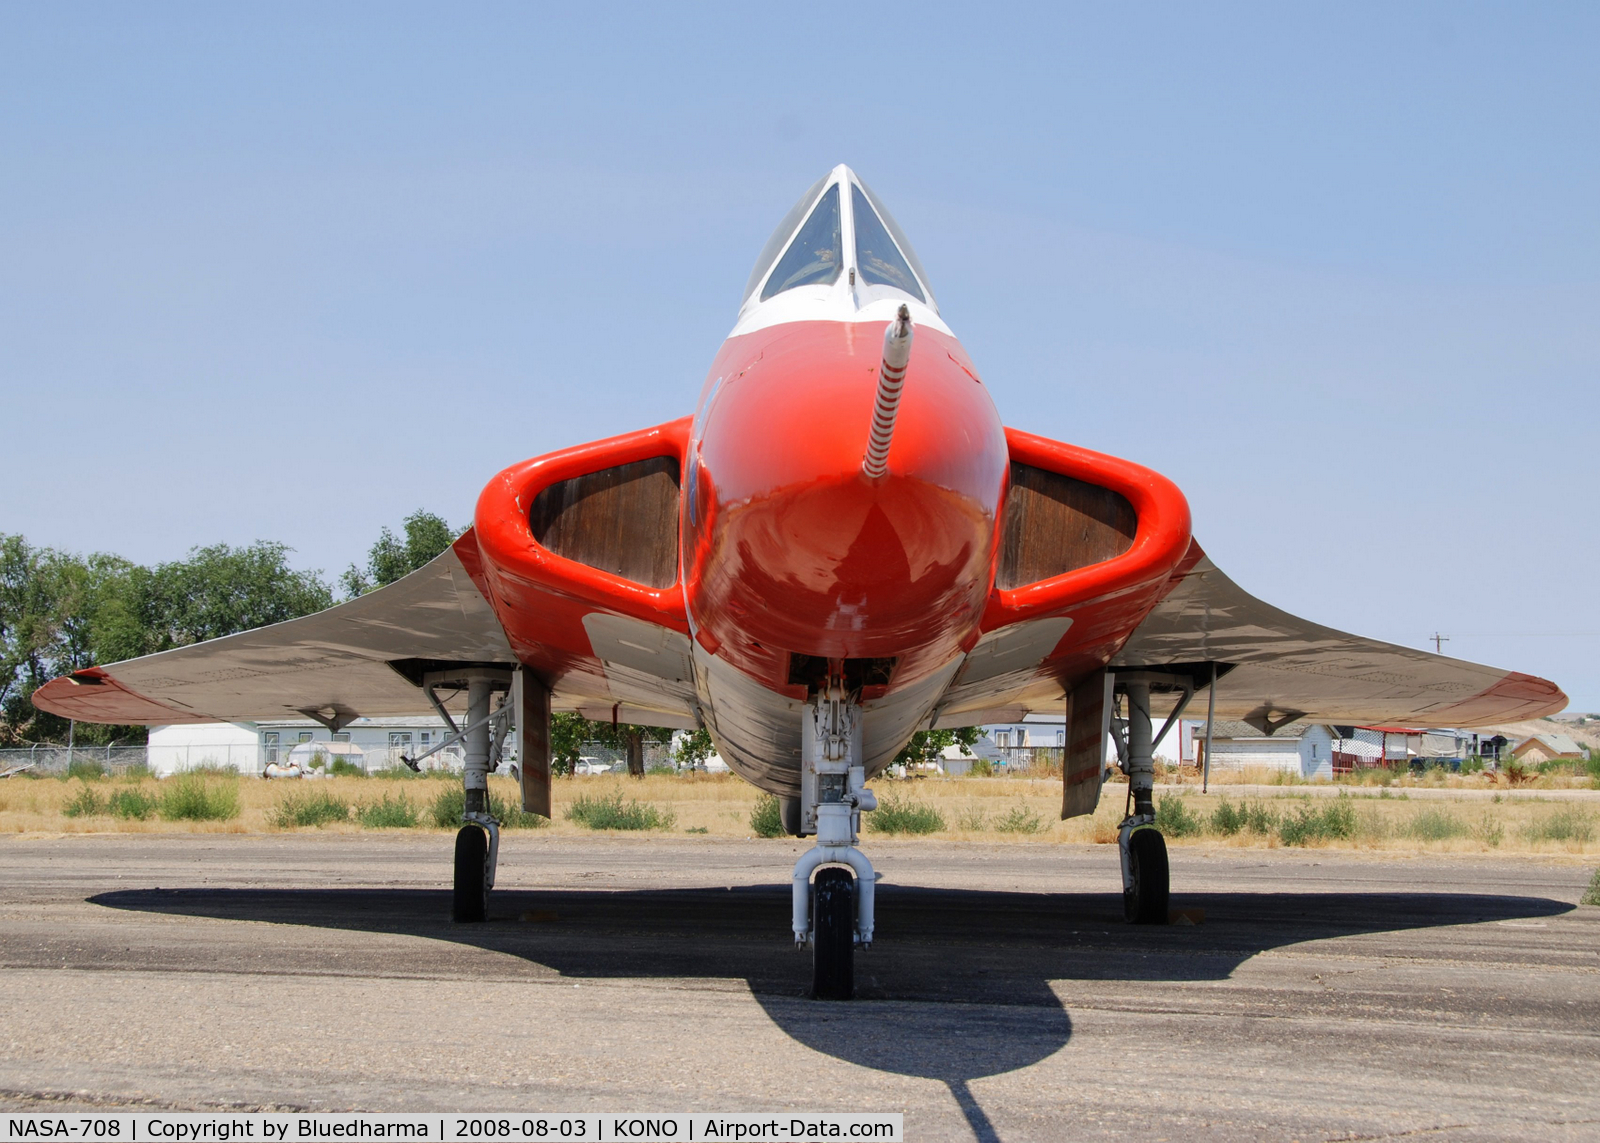 NASA-708, 1961 Douglas F5D-1 Skylancer C/N 11593, Parked in Ontario Oregon as part of private collection.